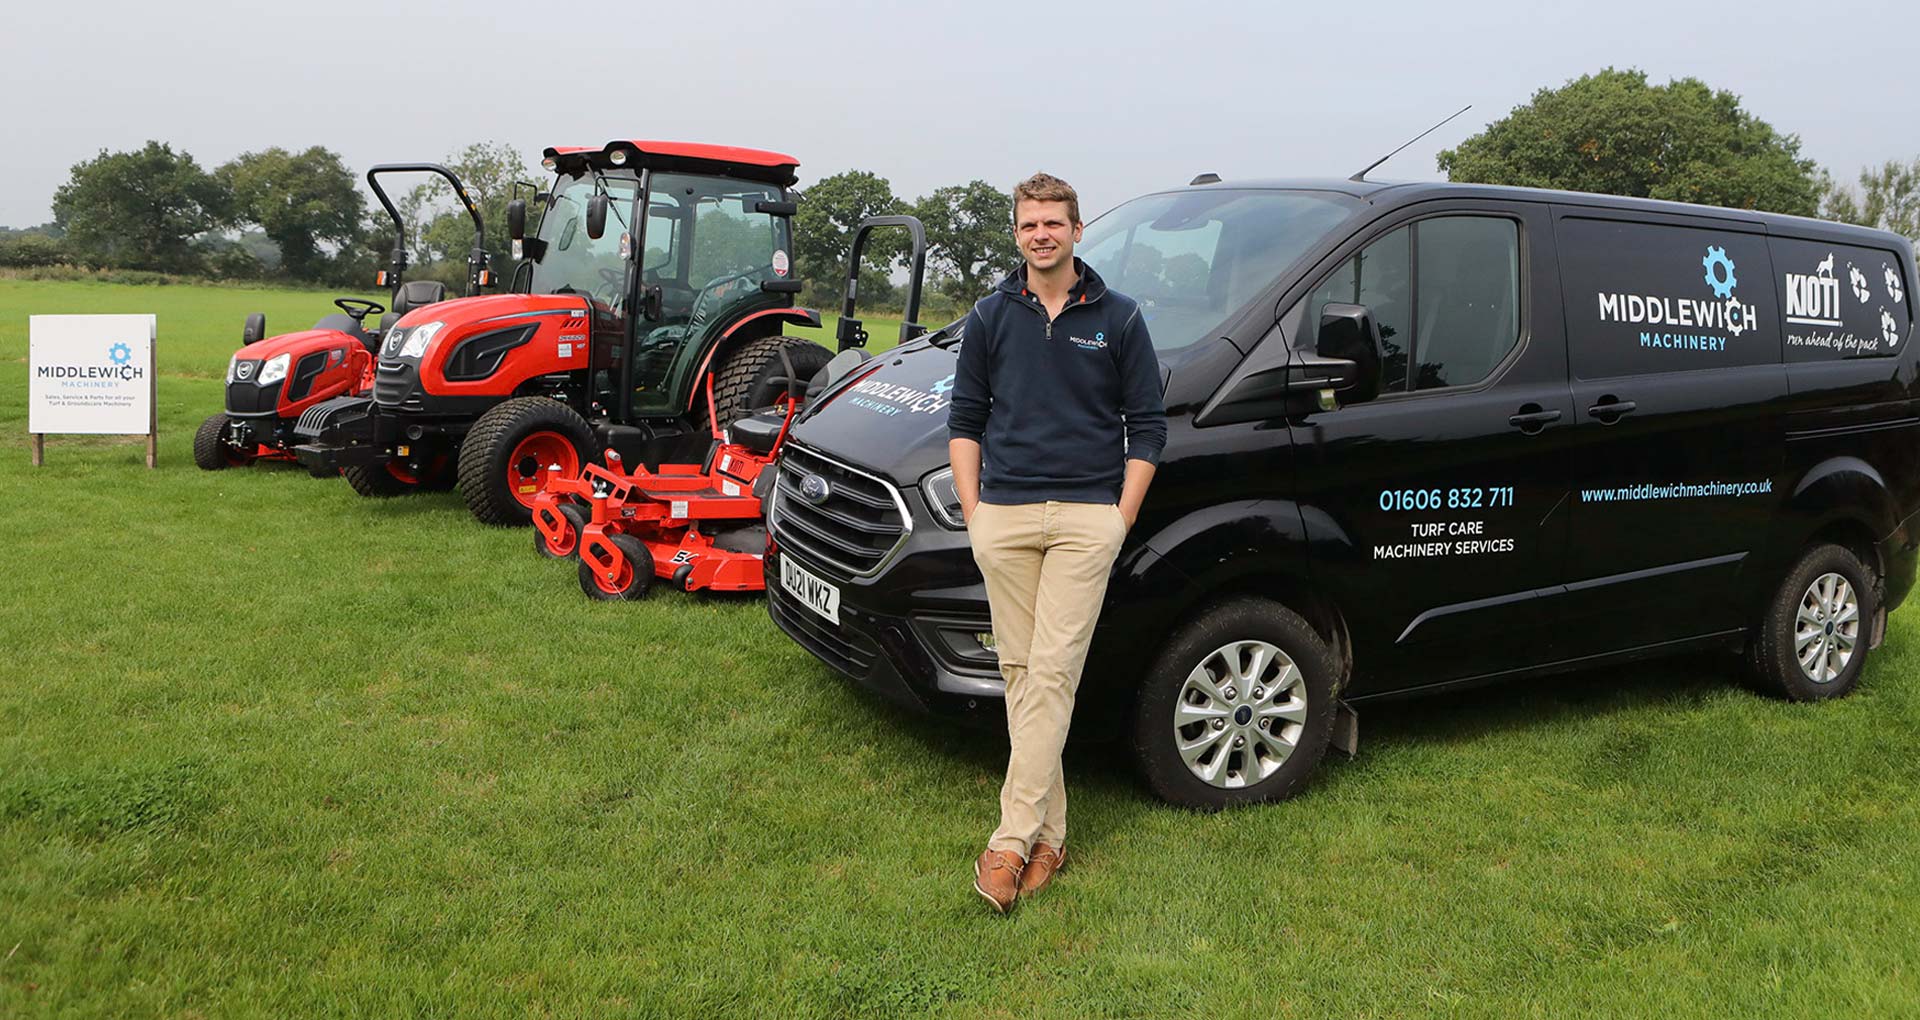 Peter Hough - Middlewich Machinery owner